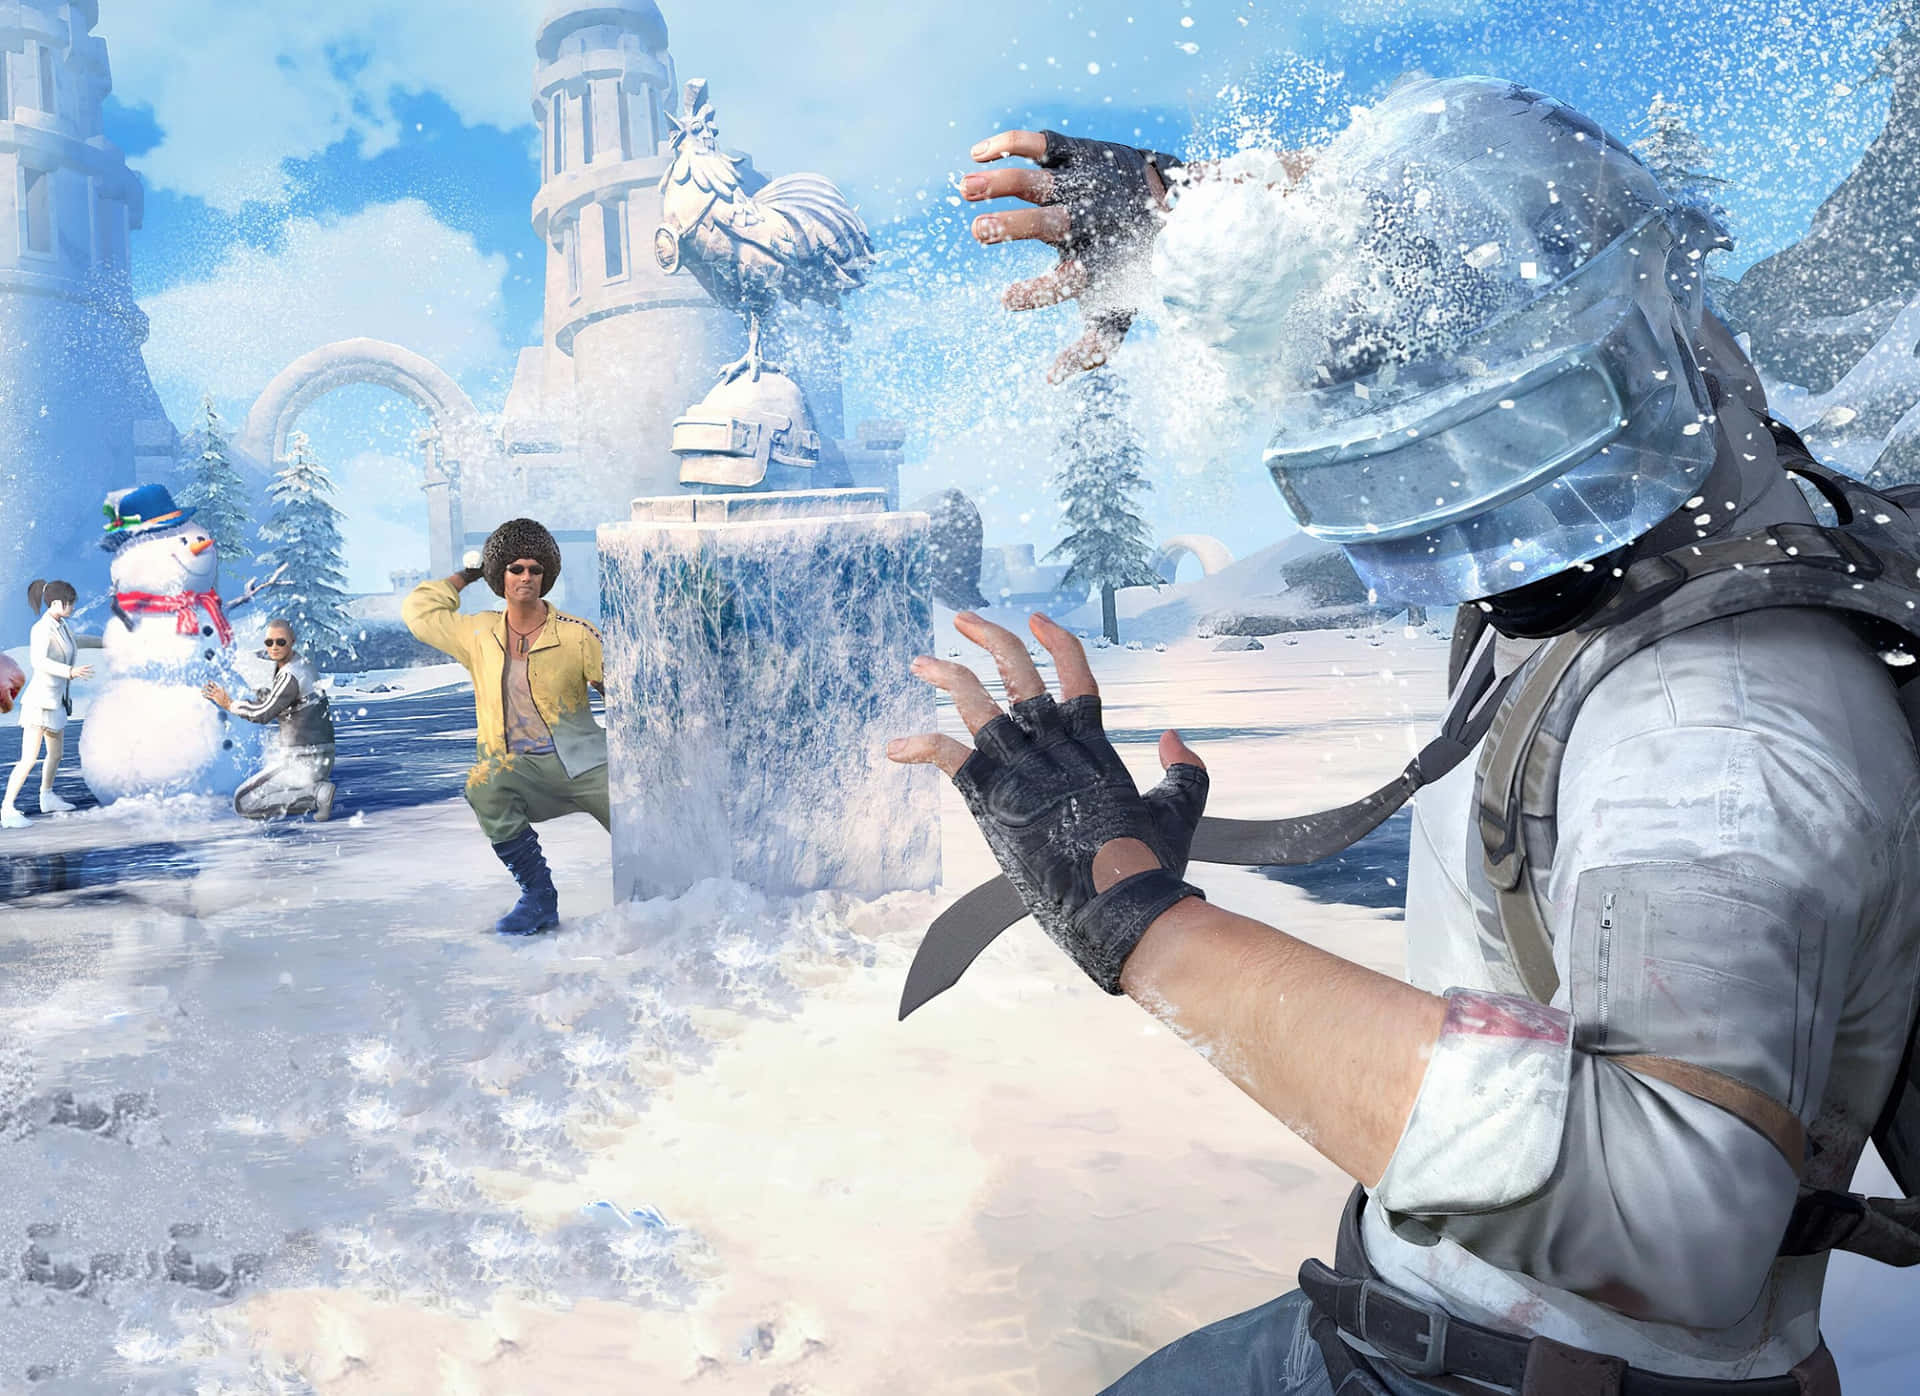 Exciting Snowball Fight in Winter Wonderland Wallpaper